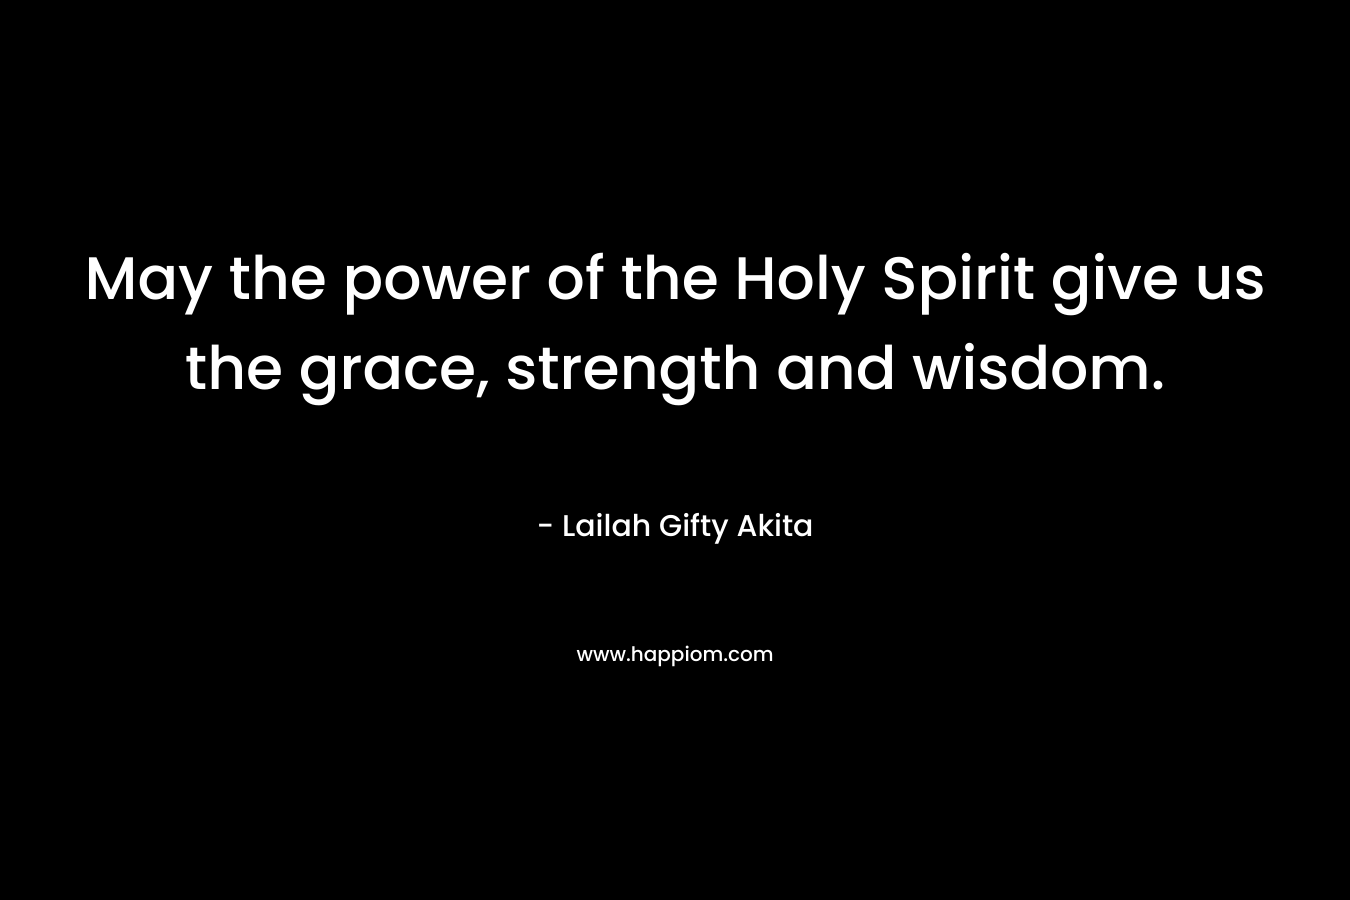 May the power of the Holy Spirit give us the grace, strength and wisdom.